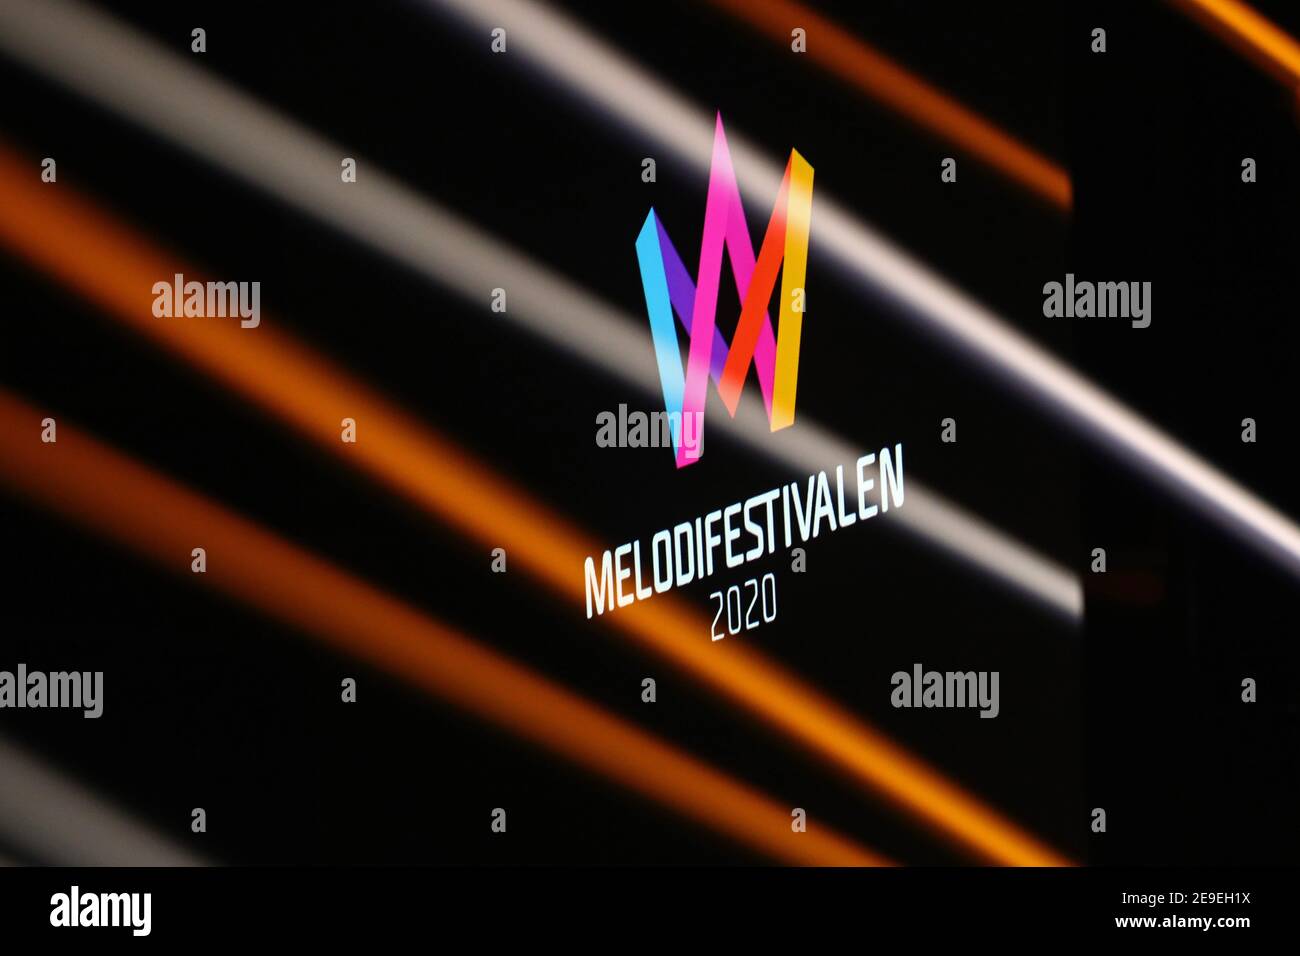 LINKÖPING, SWEDEN- 30 JANUARY 2020:Melodifestivalen the Melody Festival is an annual song competition organised by Swedish public broadcasters Sveriges Television (SVT) and Sveriges Radio (SR). Stock Photo